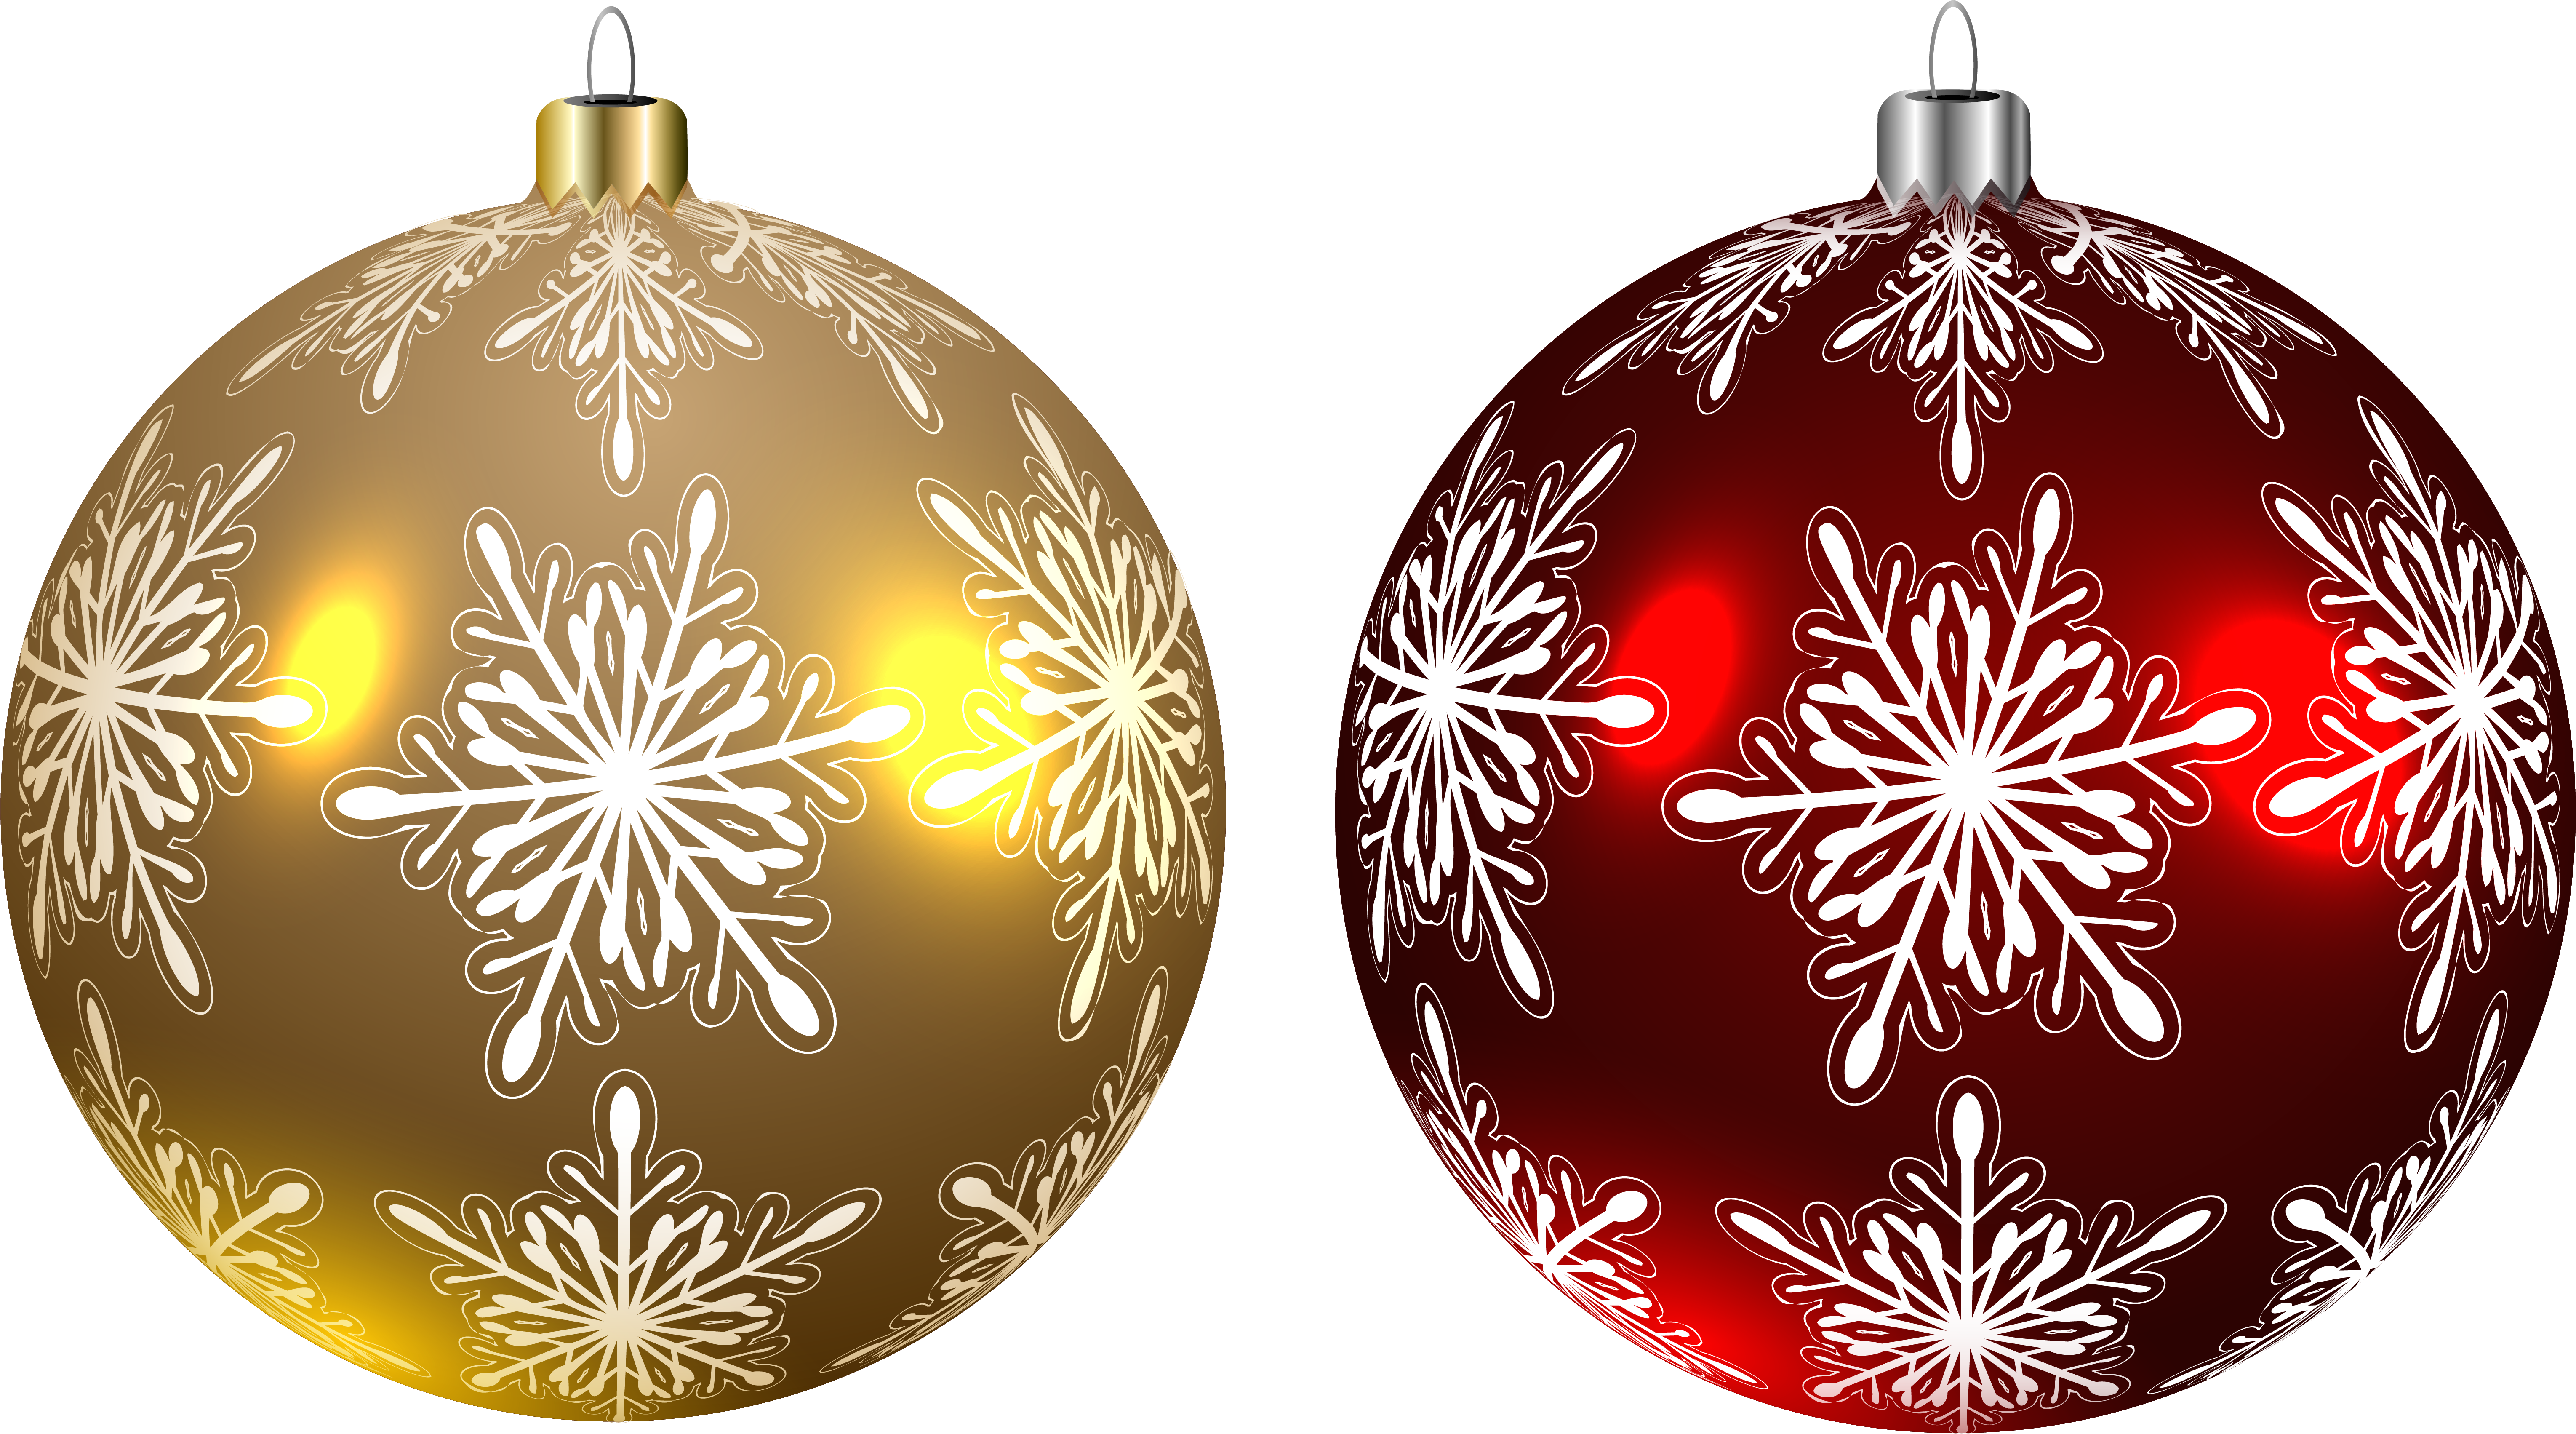 Goldenand Red Christmas Ballswith Snowflake Patterns